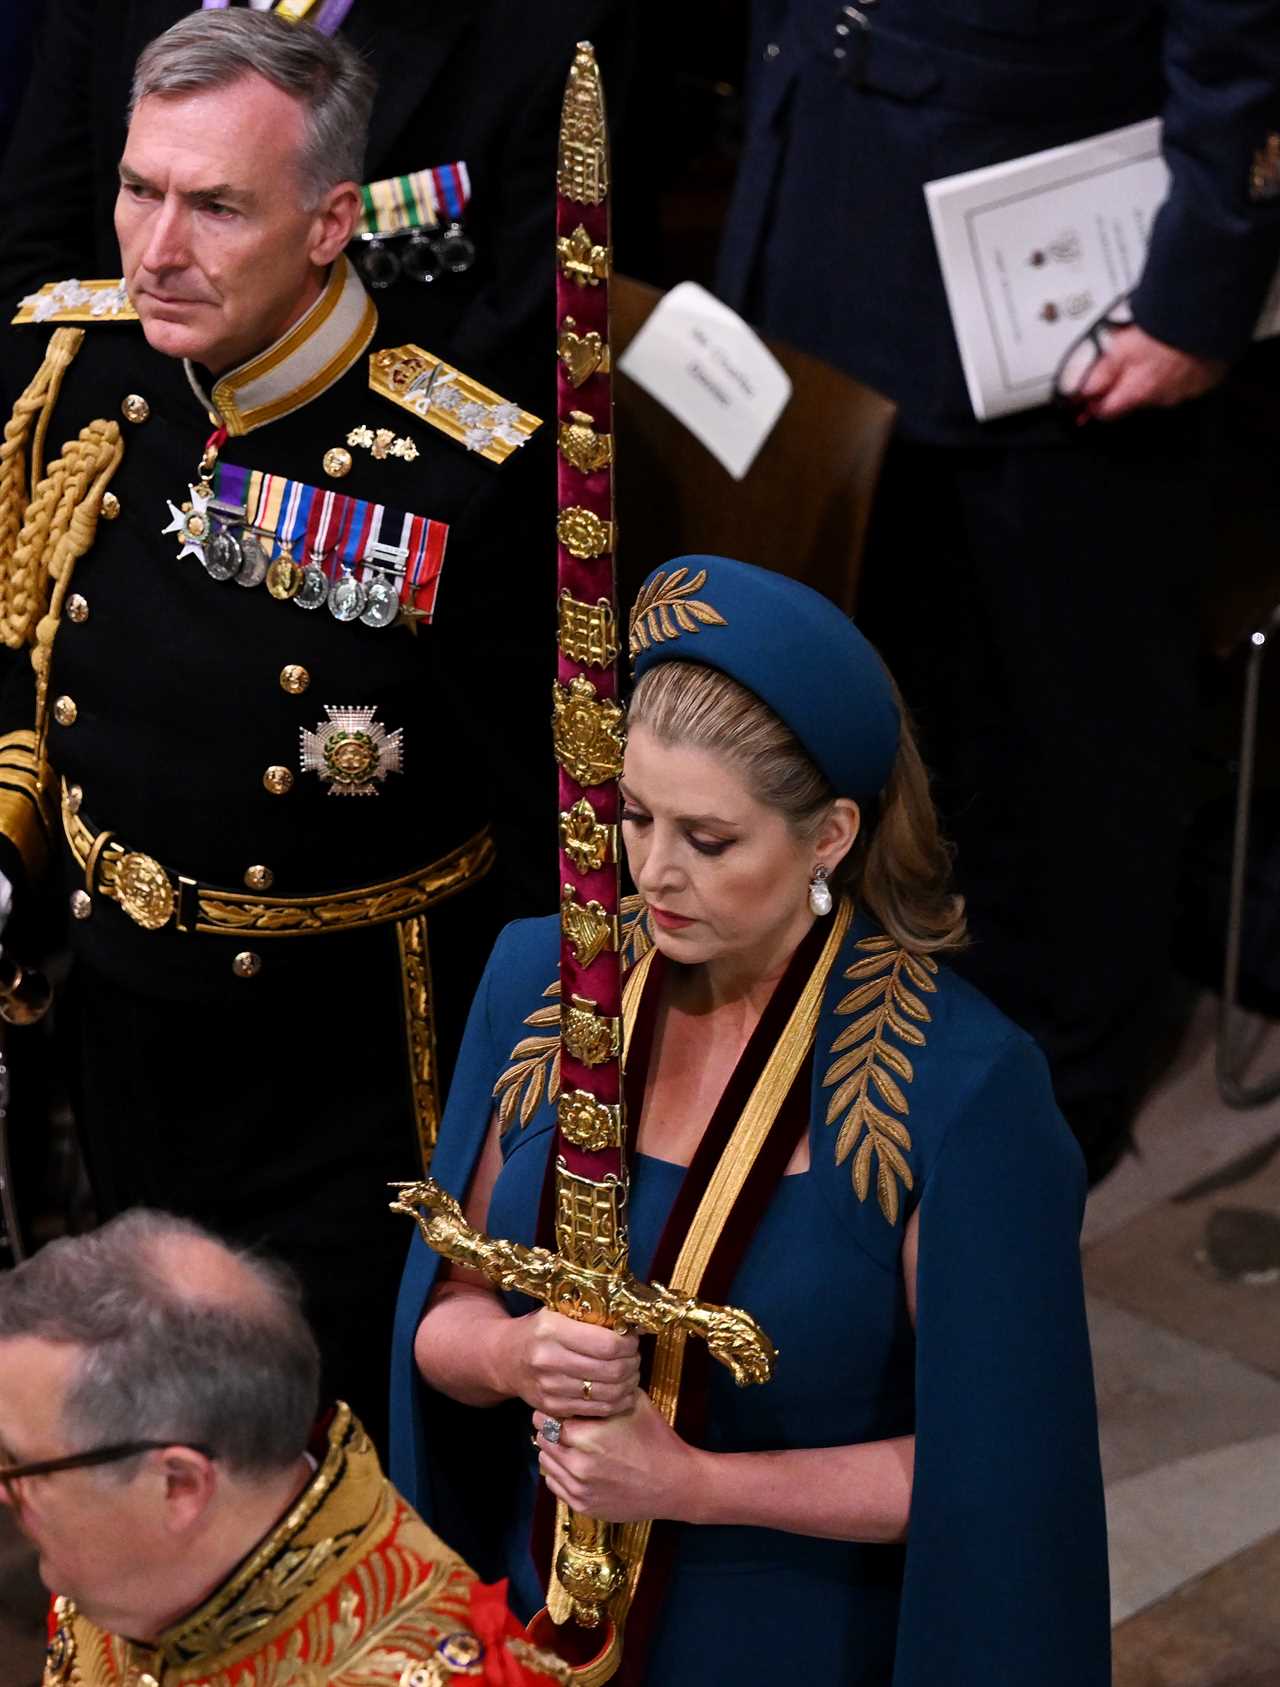 Game of Thrones cast write to Penny Mordaunt to praise her “nice sword work” after she dazzled the world at Coronation